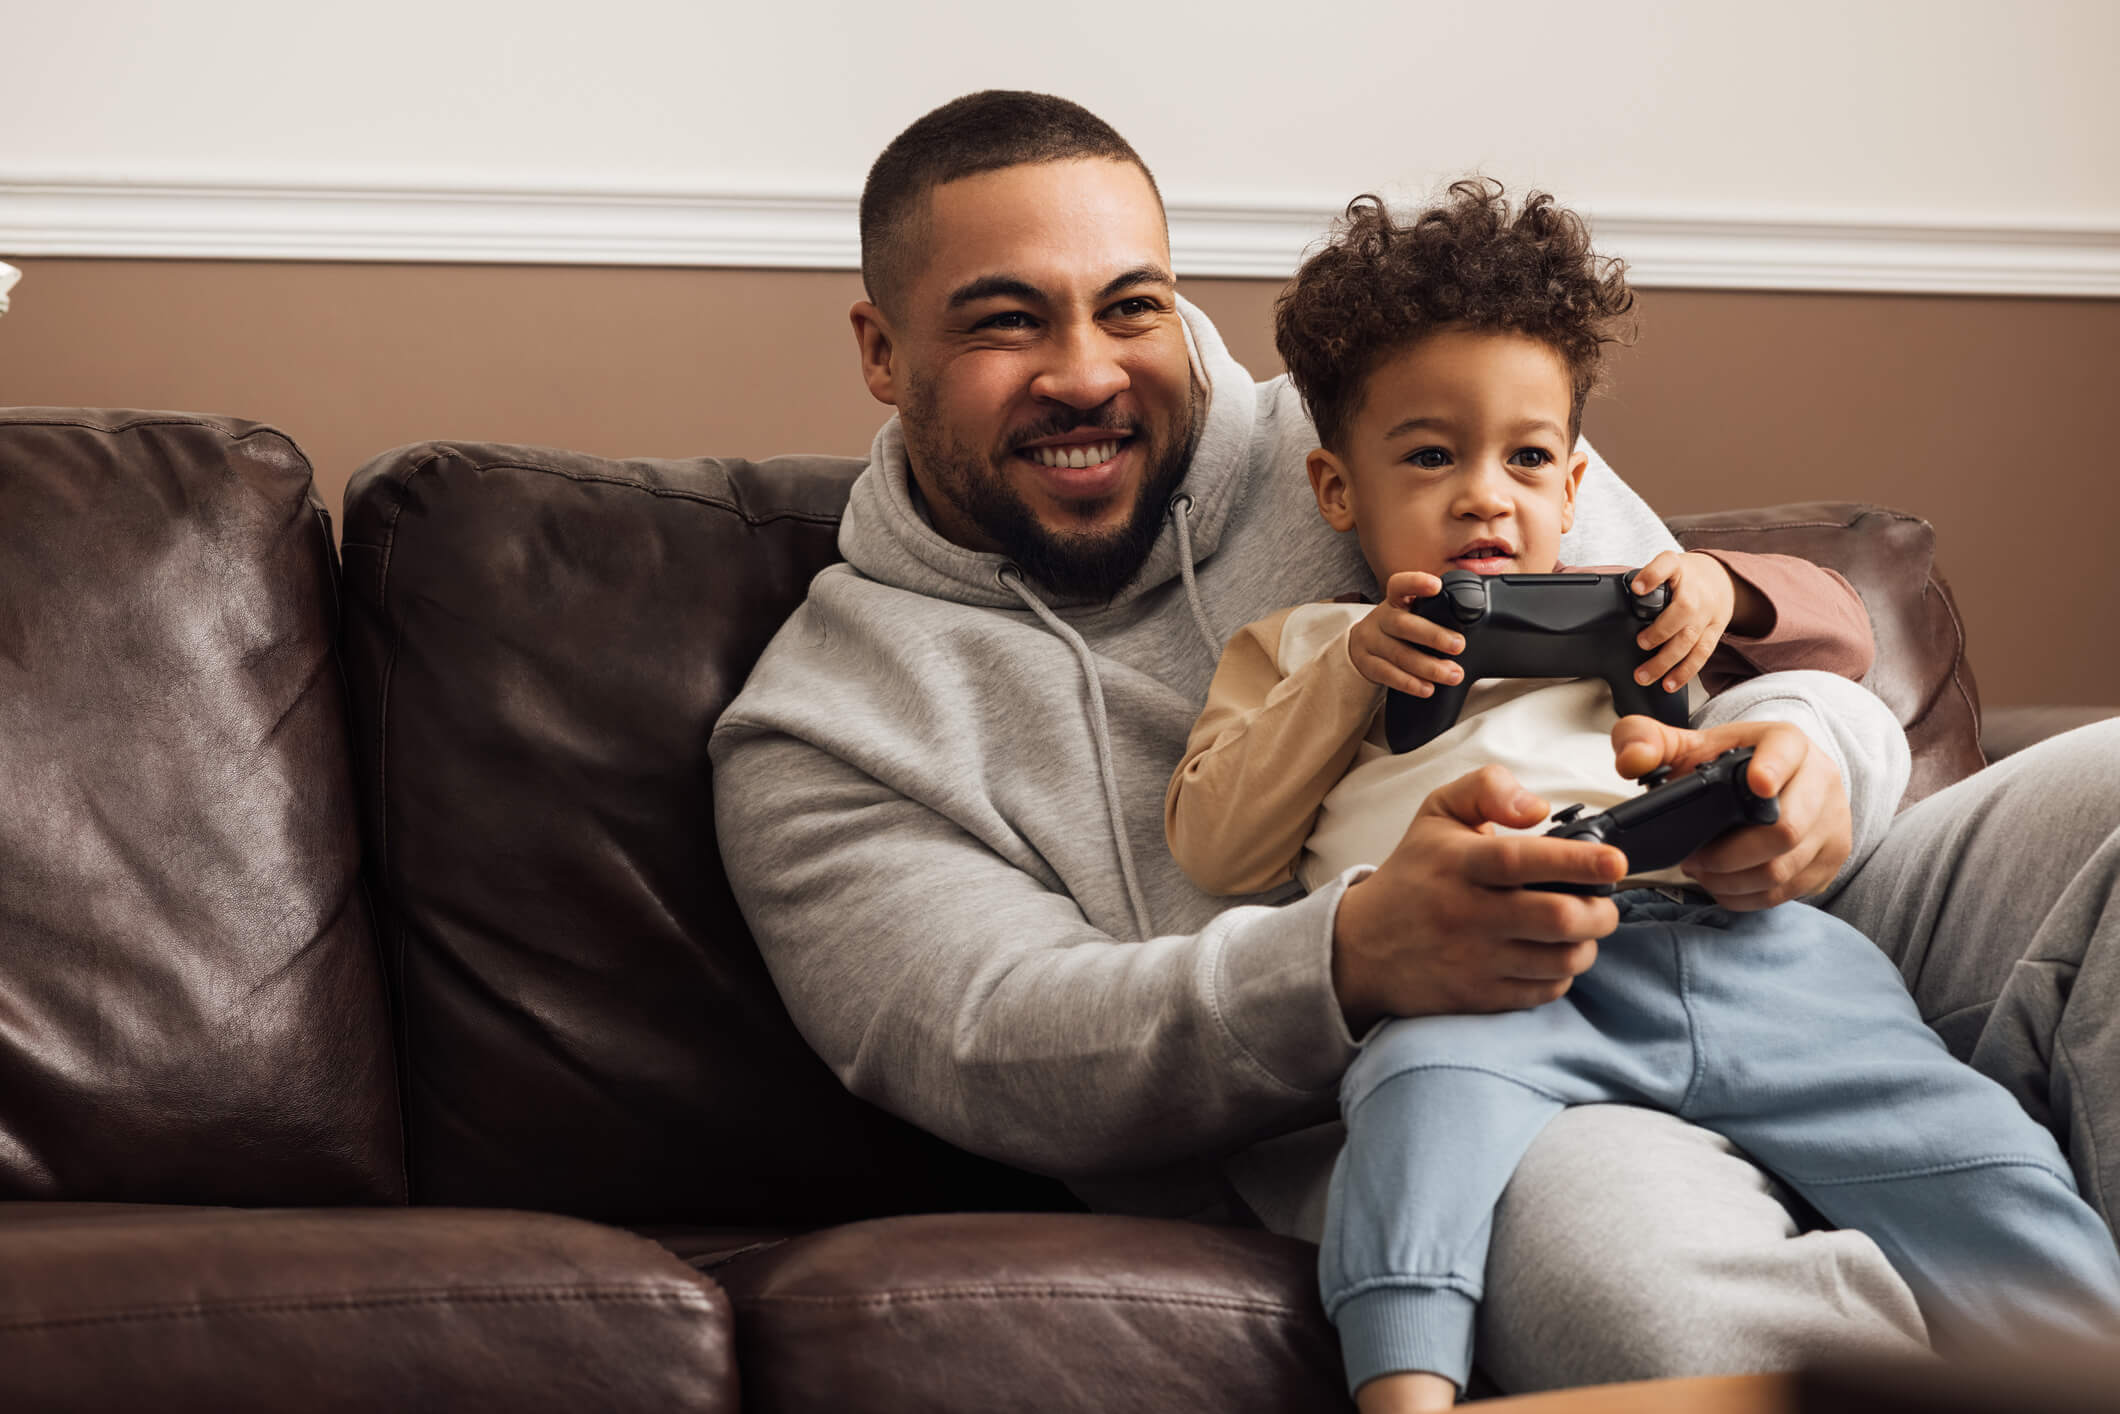 foster parent playing video games and smiling with child